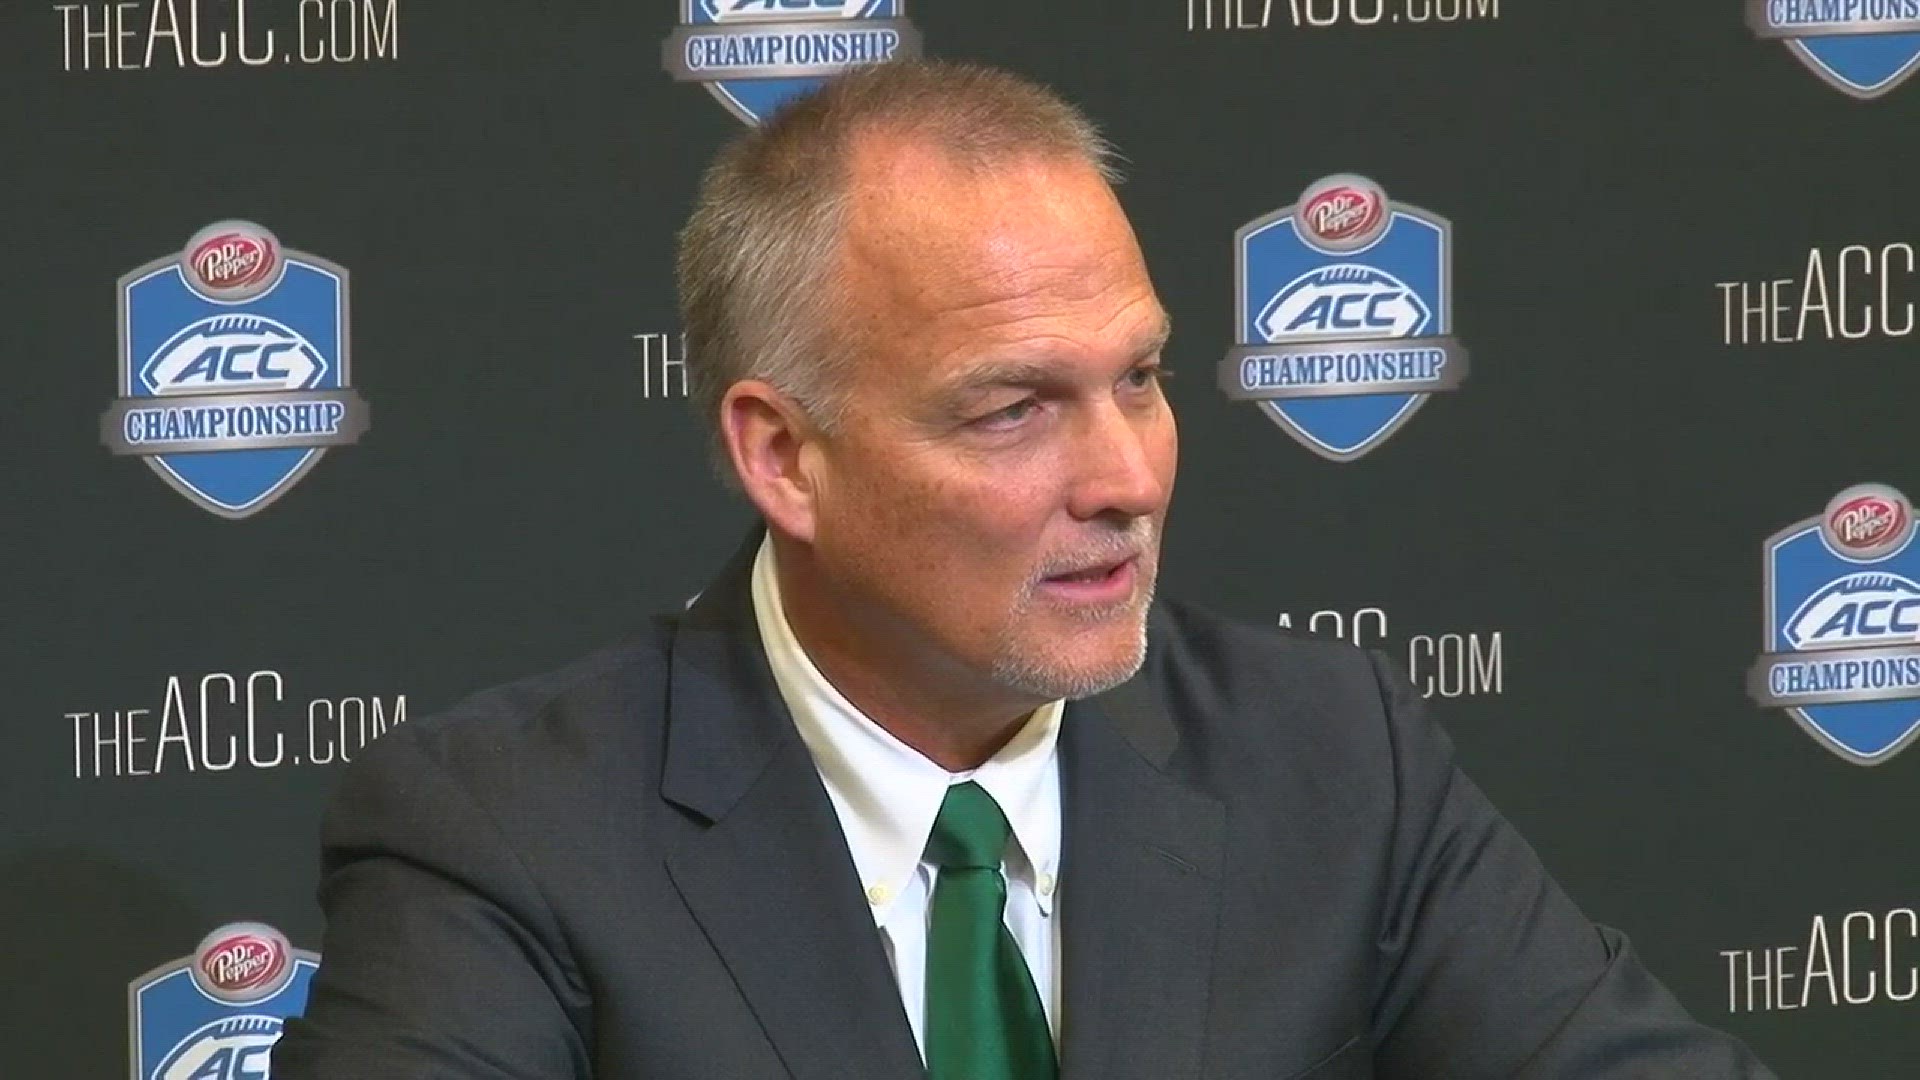 2nd year head coach Mark Richt of the Miami Hurricanes leads his team into their first ACC title game. He talks about his fondness of Dabo Swinney, the Clemson Tigers and more on this matchup for the ACC Championship.